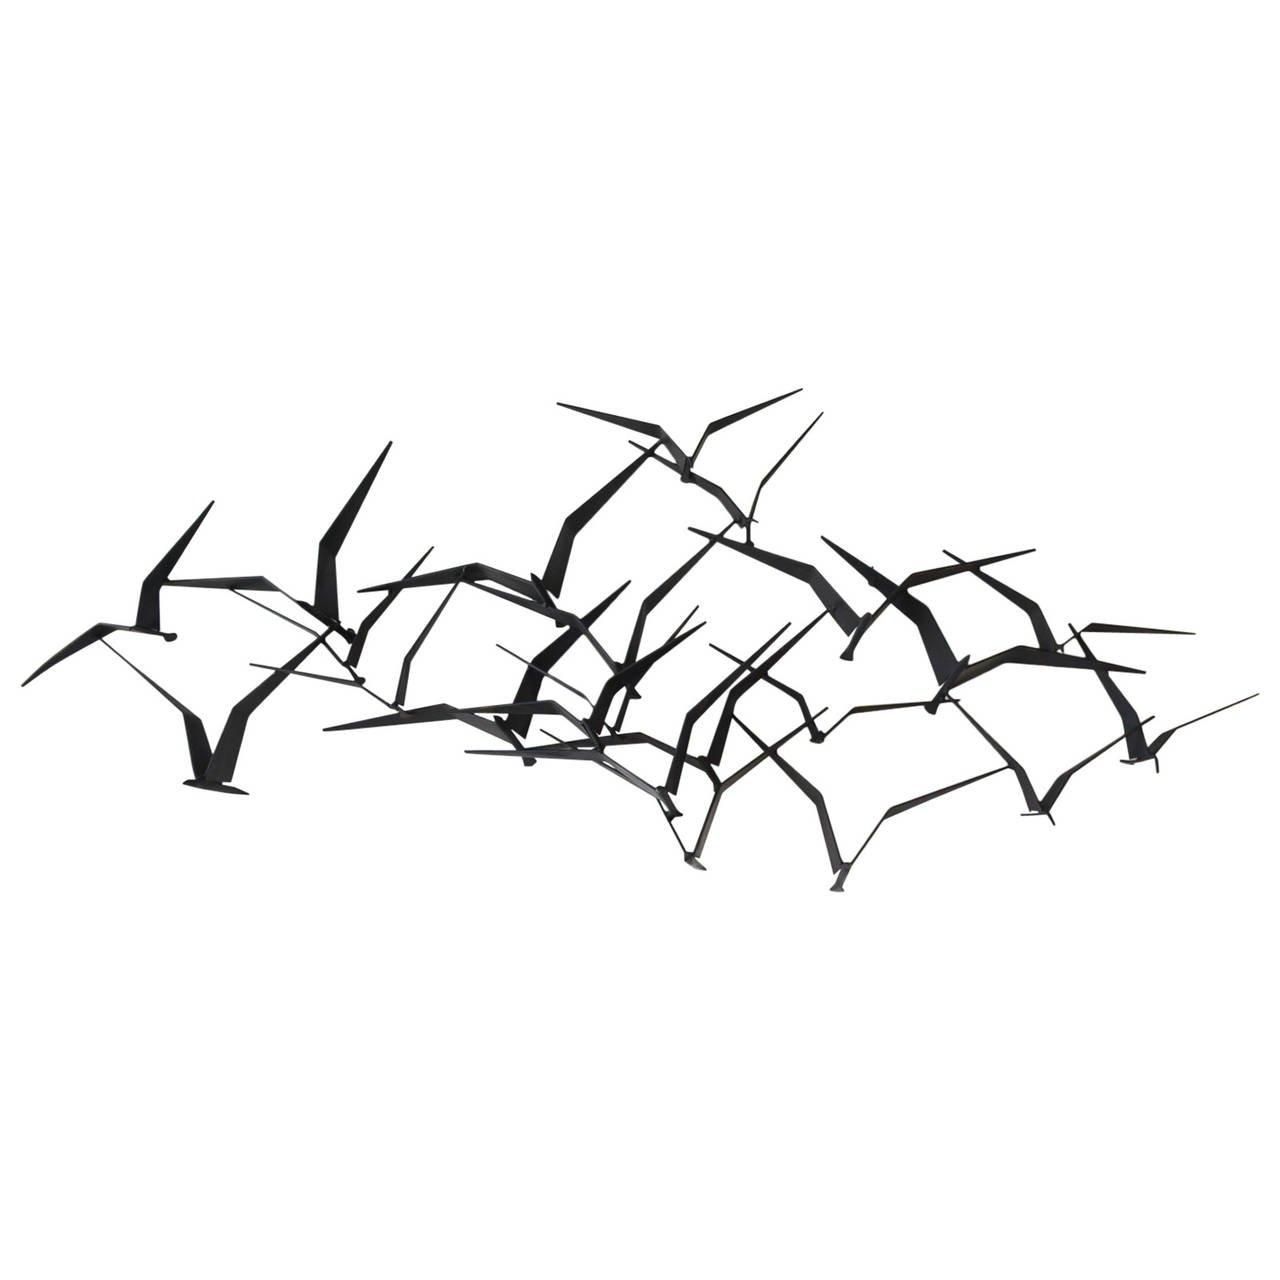 Curtis Jere Birds In Flight Metal Wall Sculpture At 1stdibs With Regard To Birds In Flight Metal Wall Art (View 11 of 20)